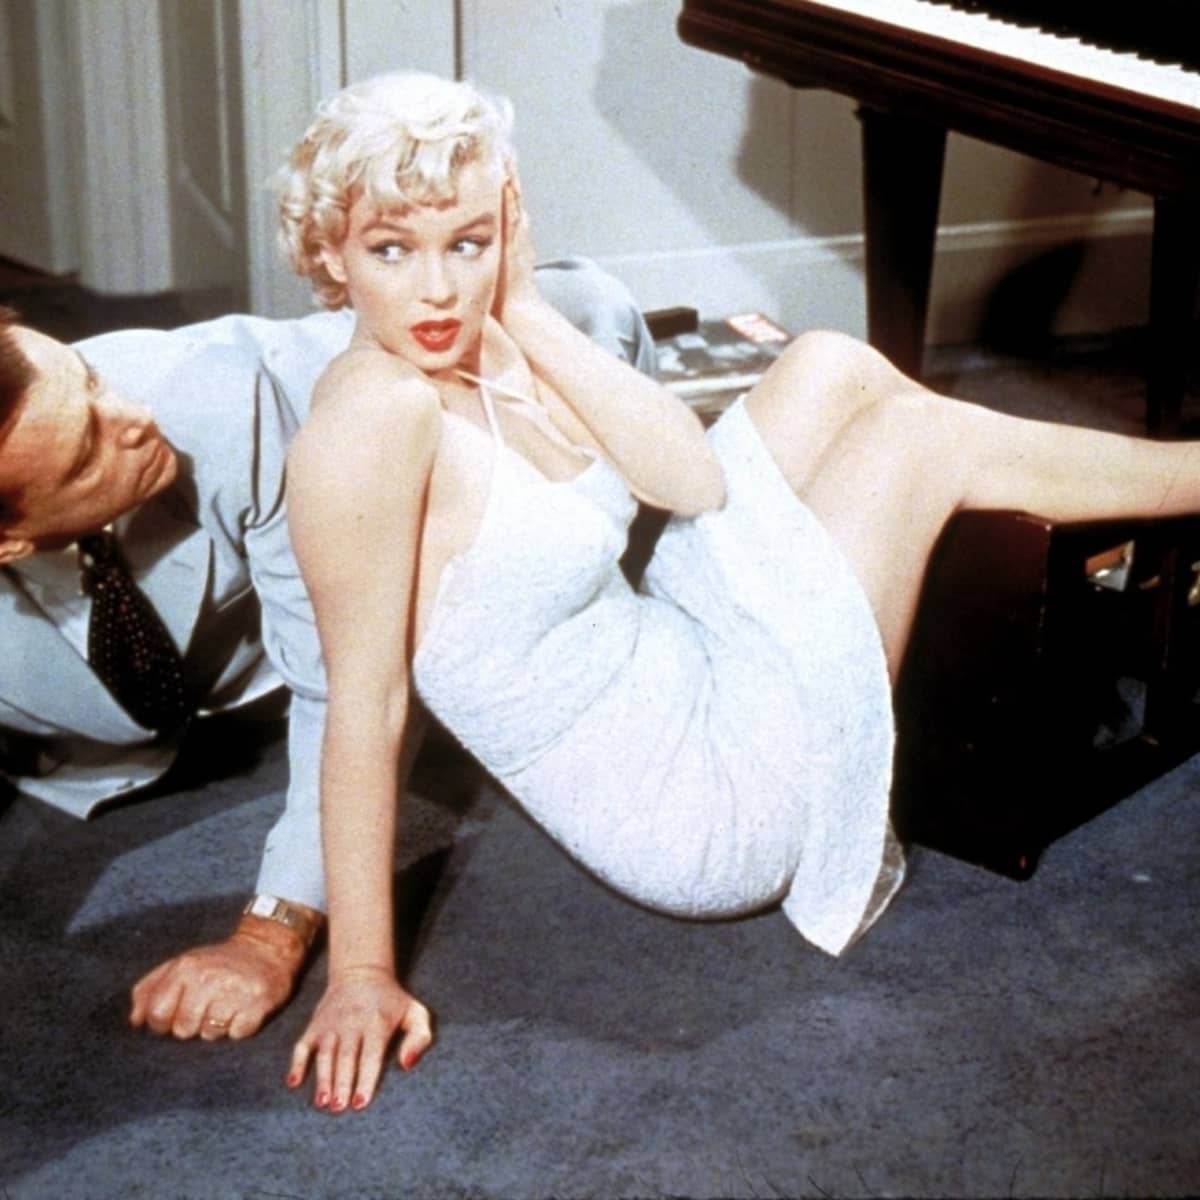 Marilyn Monroe photos show Playboy shoots and her sitting on